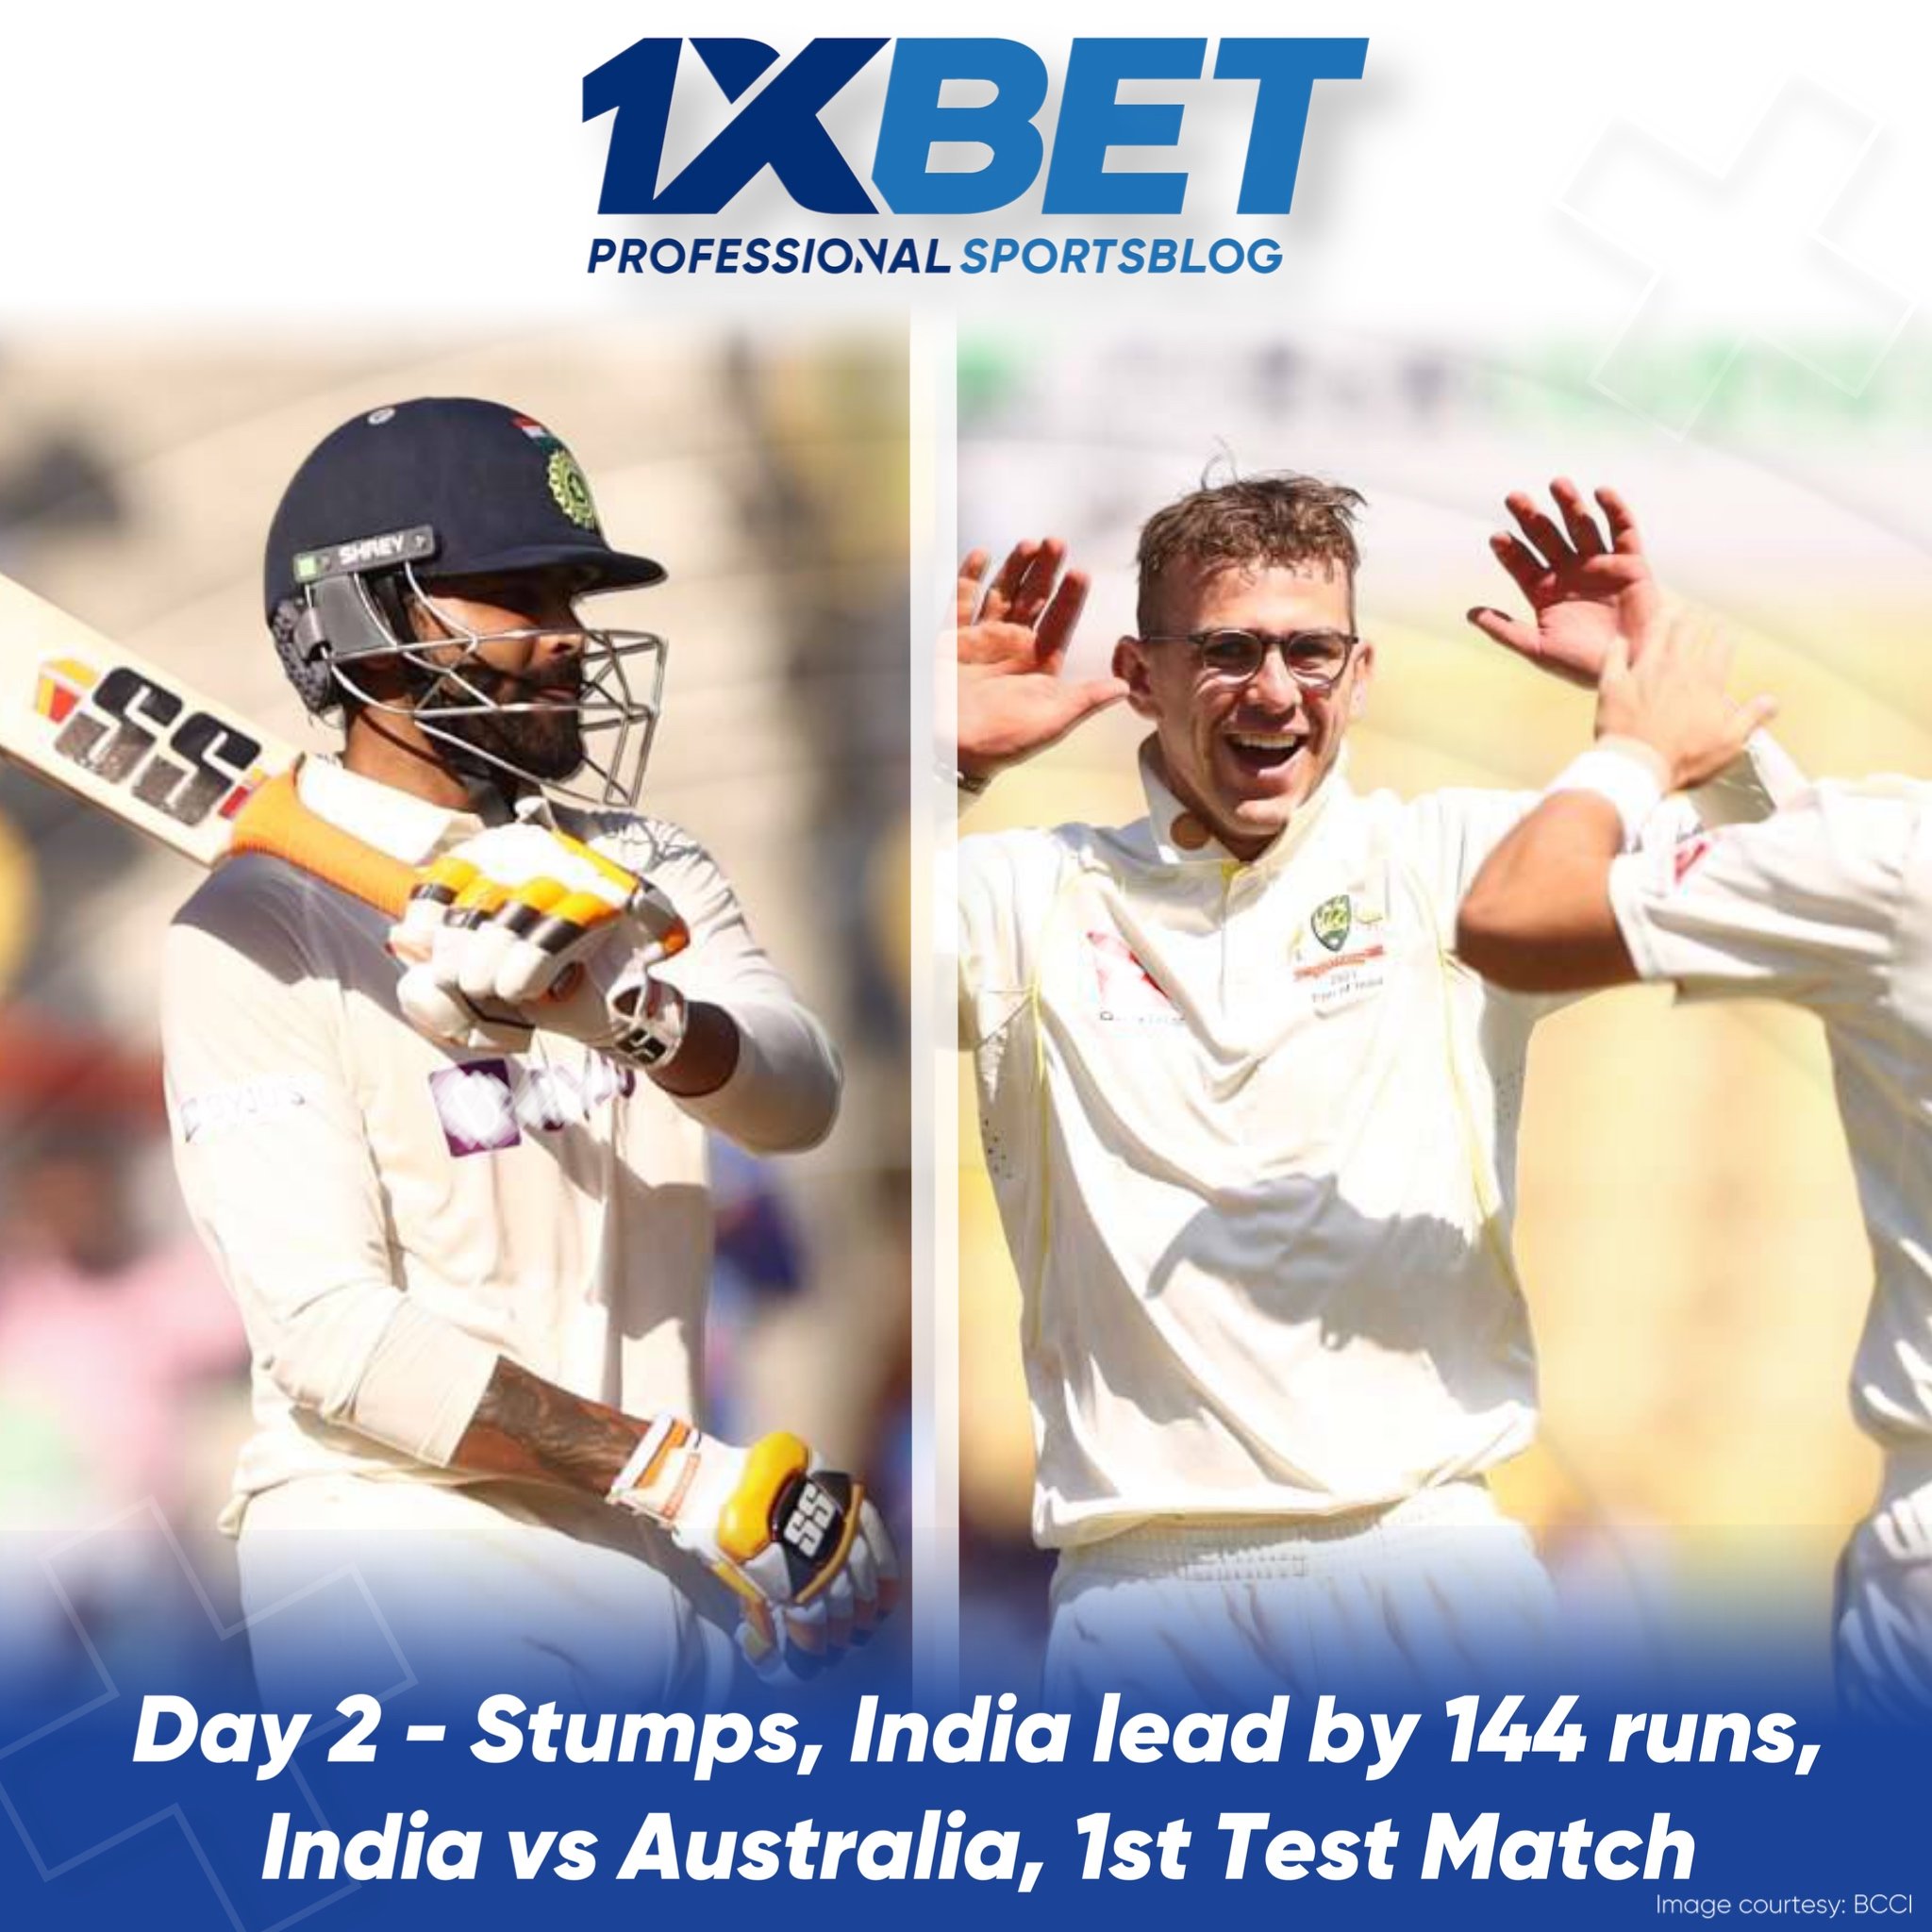 Day 2 - Stumps, India lead by 144 runs